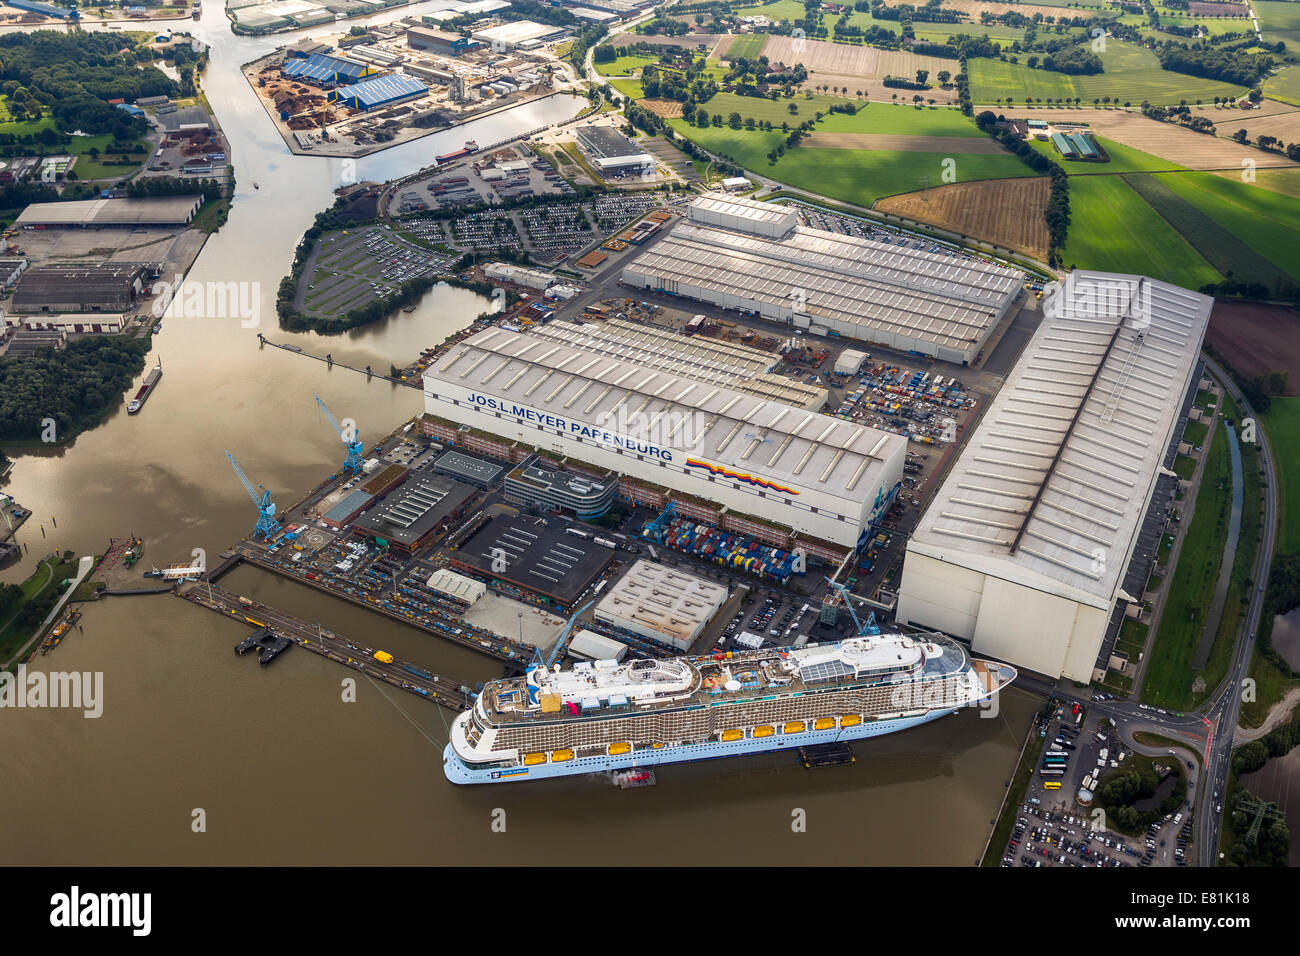 Aerial view, Papenburg Emshaven port with Jos. L. Meyer Werft shipyard and the cruise ship Quantum of the Seas, Royal Caribbean Stock Photo